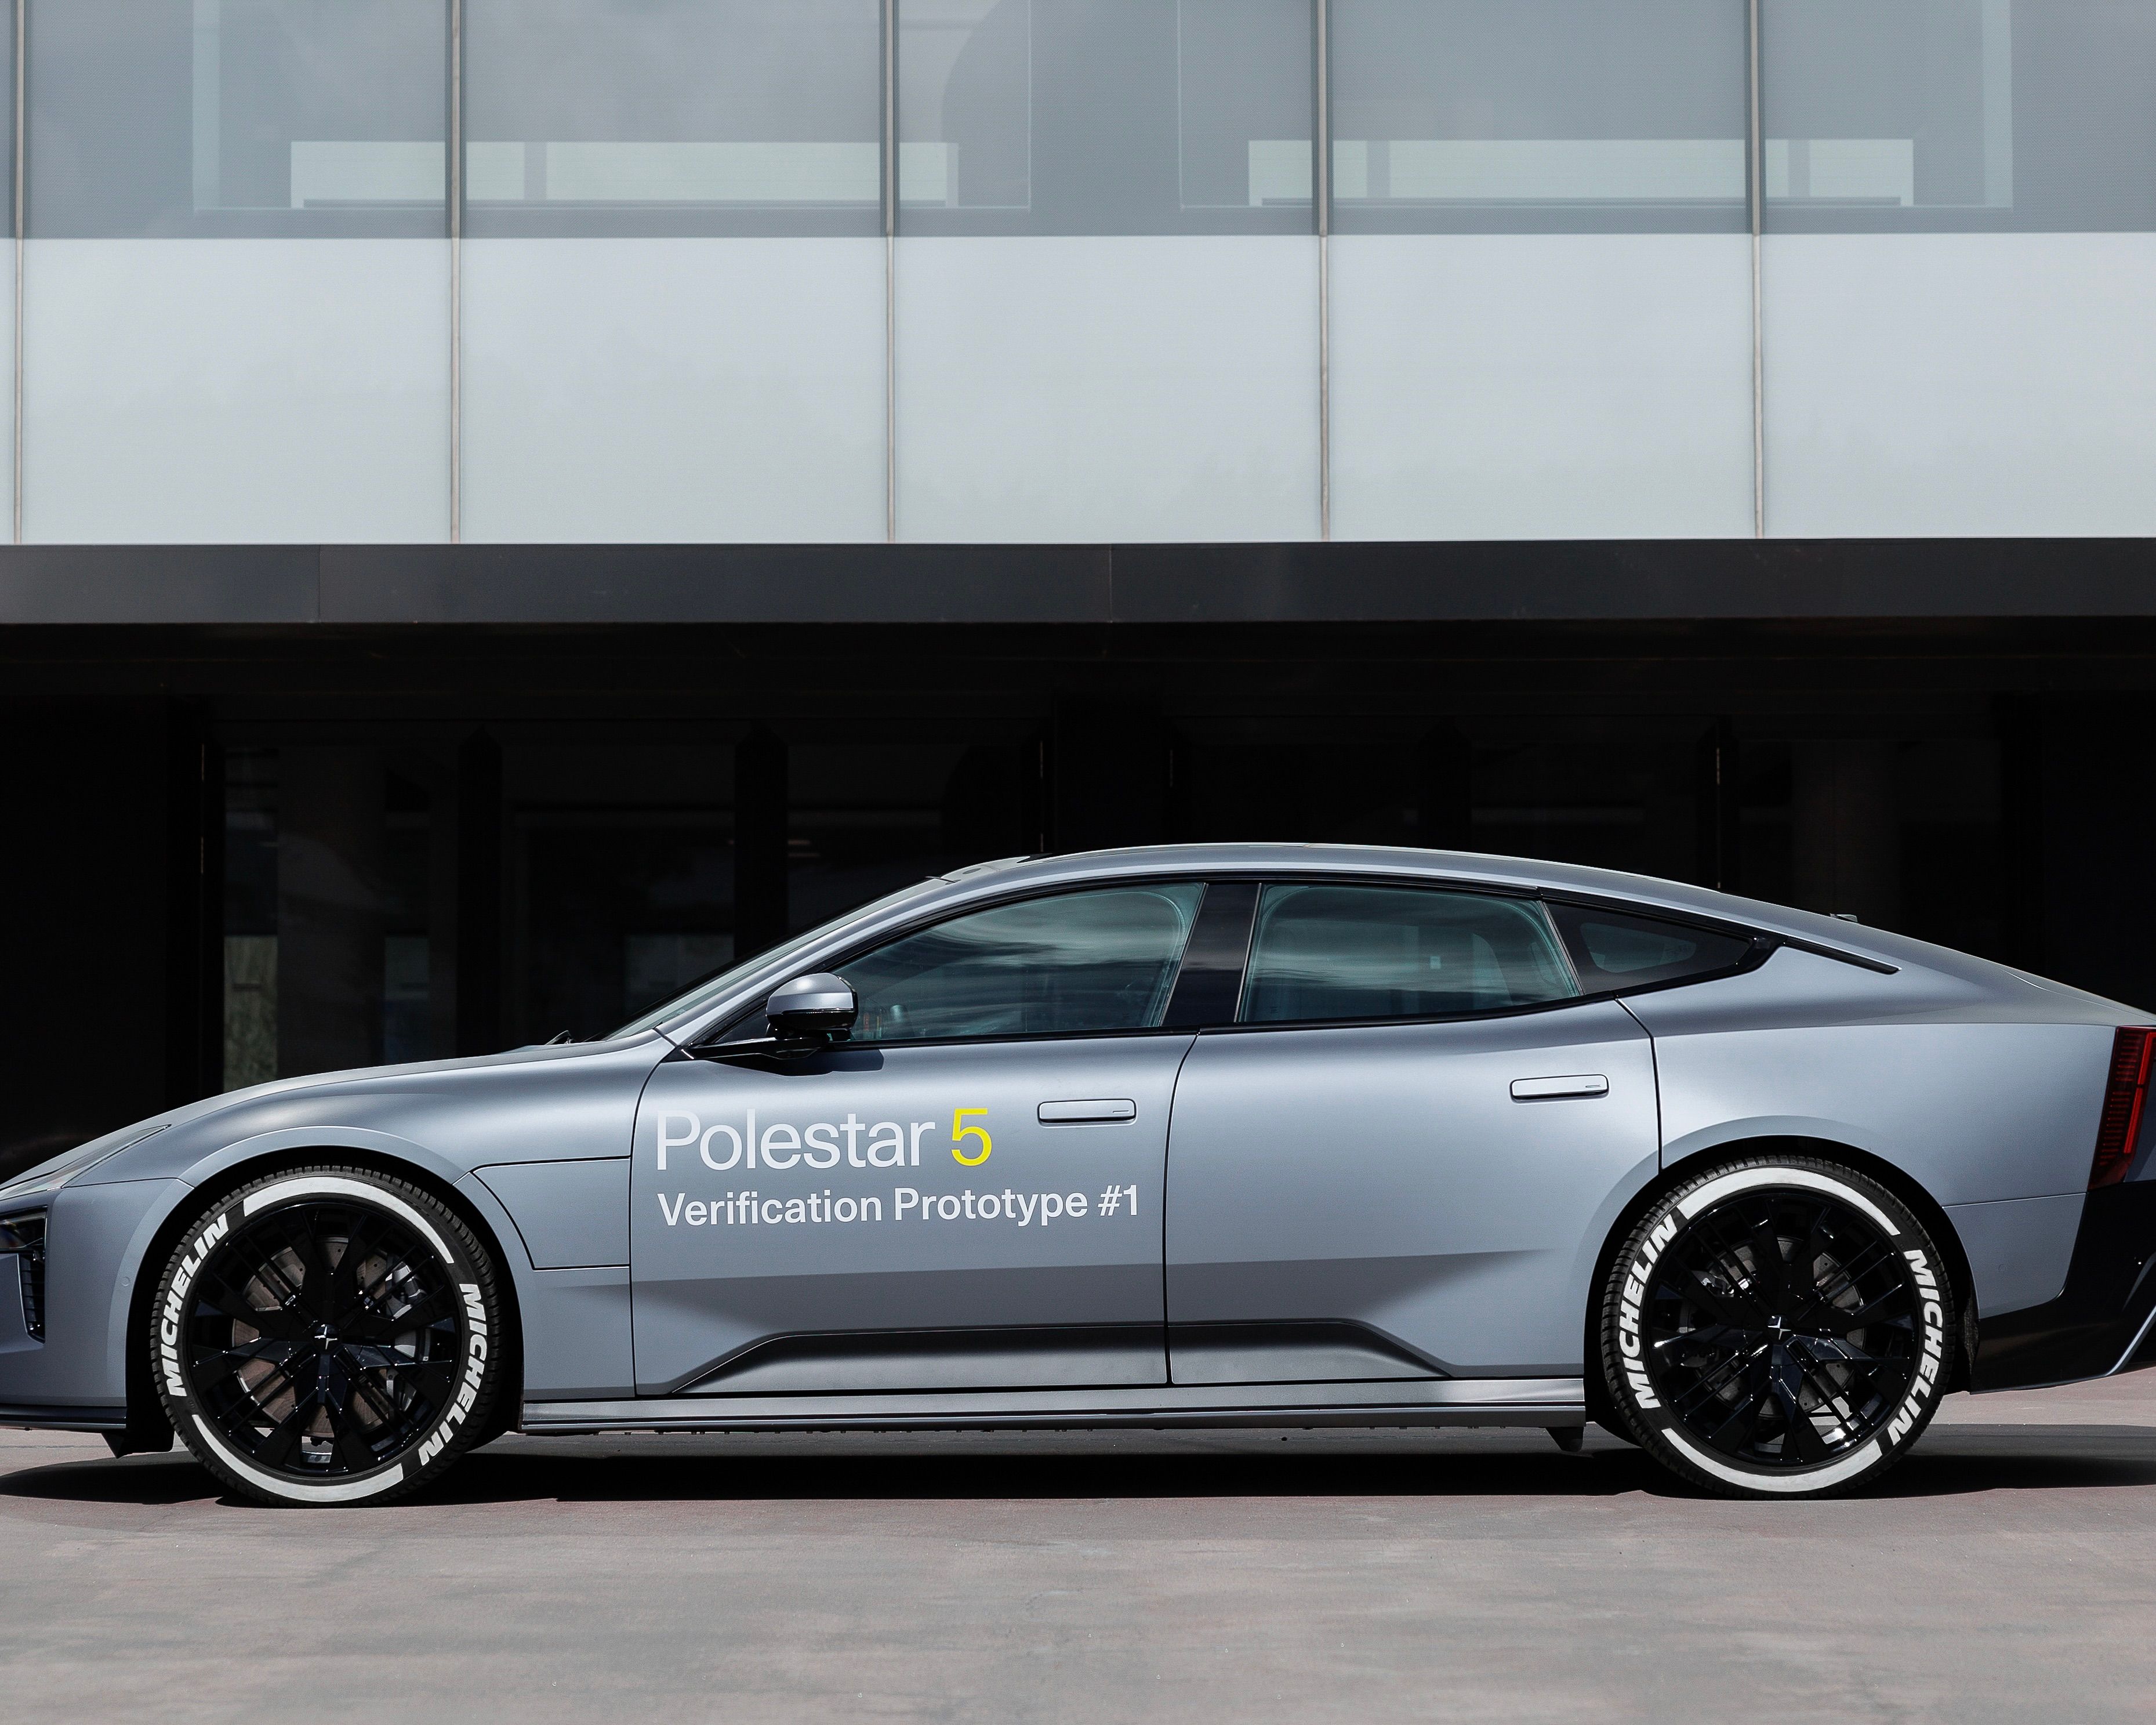 A prototype Polestar 5 brought extreme fast charging a step closer following the successful demonstration of the company’s next-generation battery p